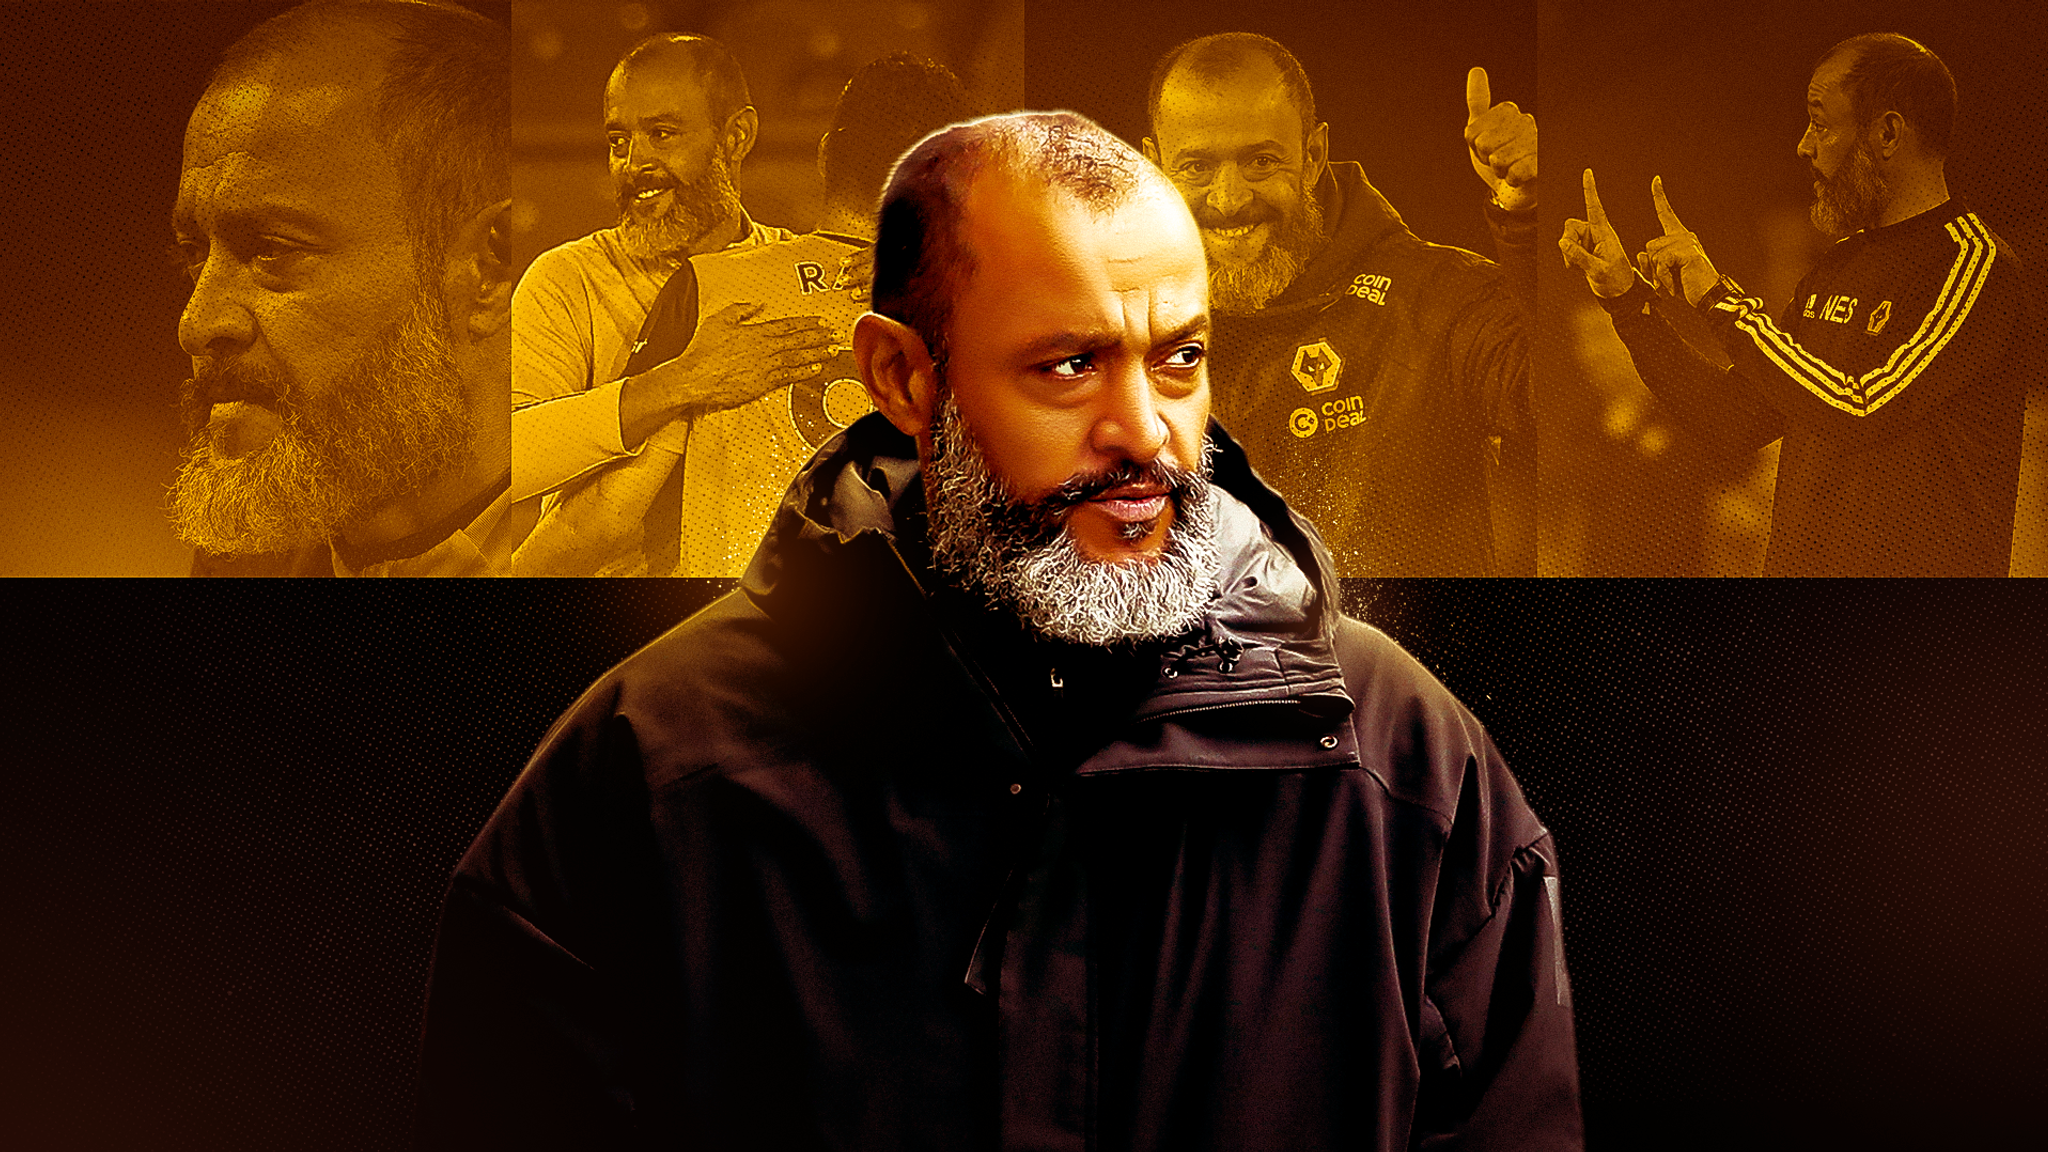 Nuno Espirito Santo to leave Wolves: Four years that brought magic moments but now feels a natural end